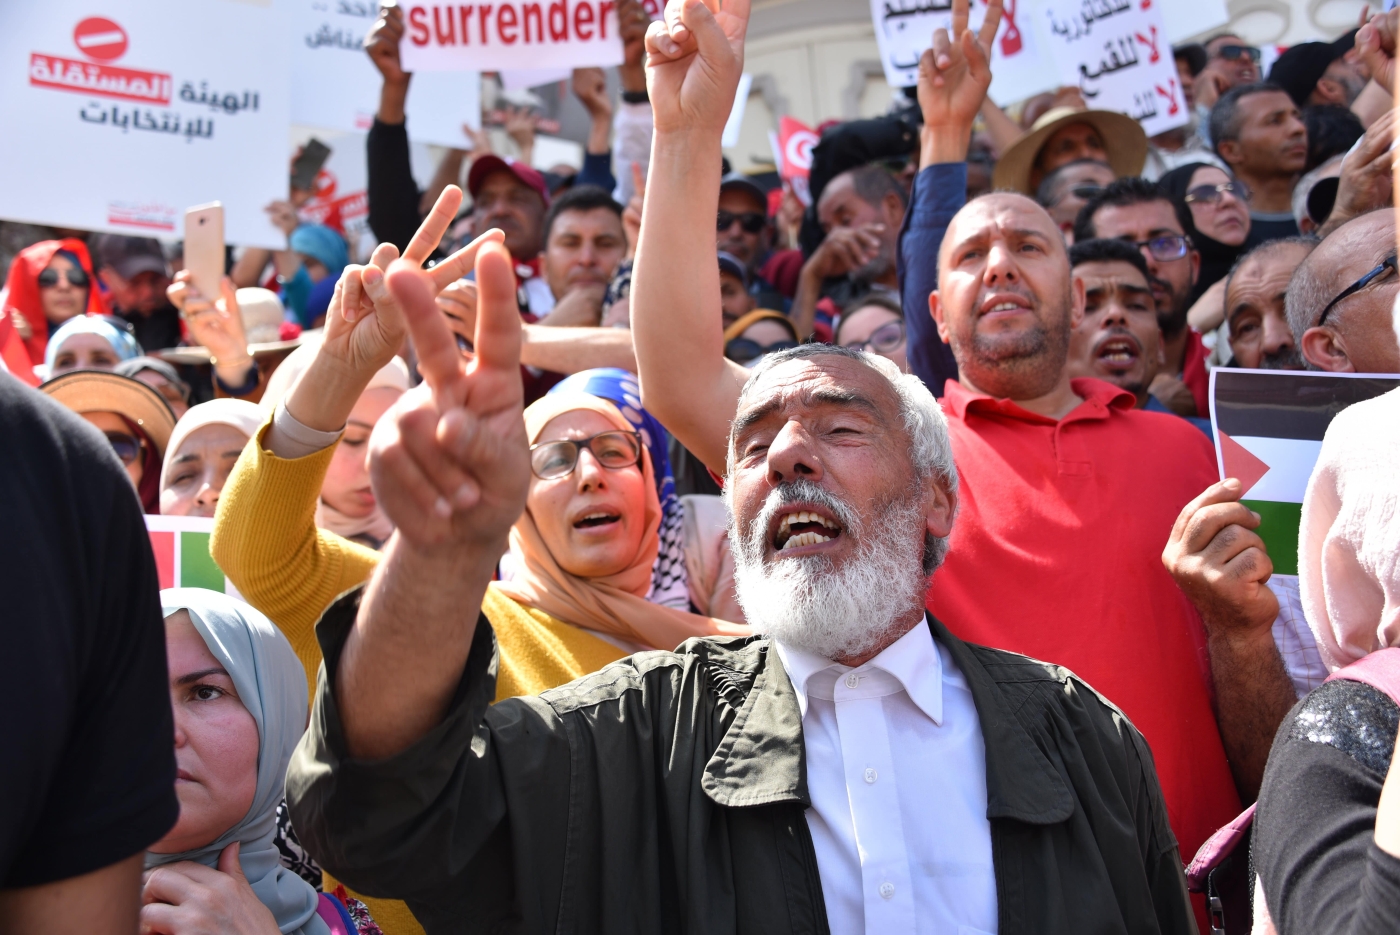 Tunisian protesters wave flags and rase placards as they demonstrate against their president in the capital Tunis, on 15 May 2022. (Reuters)